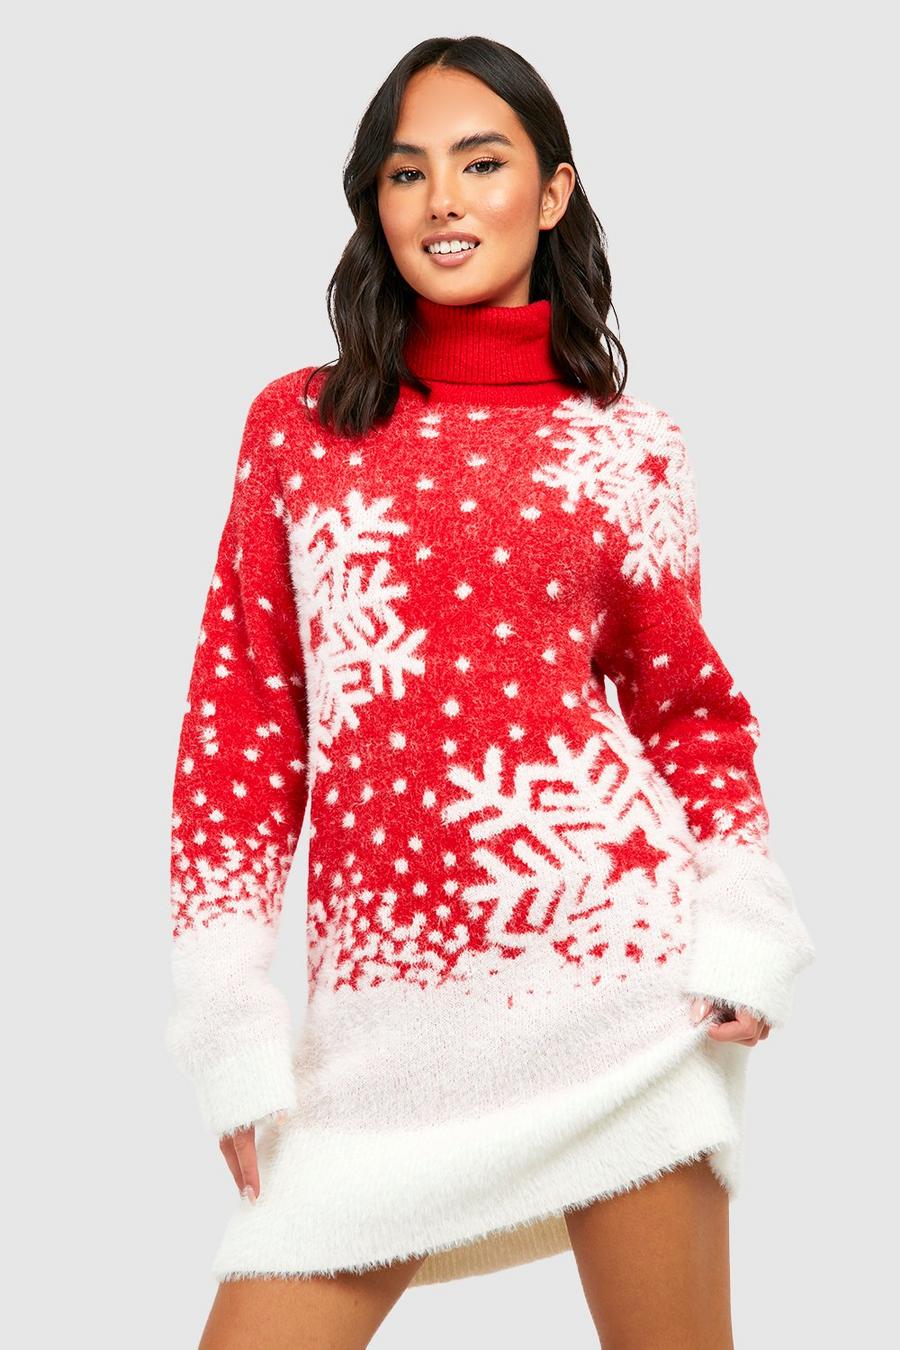 Red Snowflake Fully Knit Turtleneck Sweater Dress